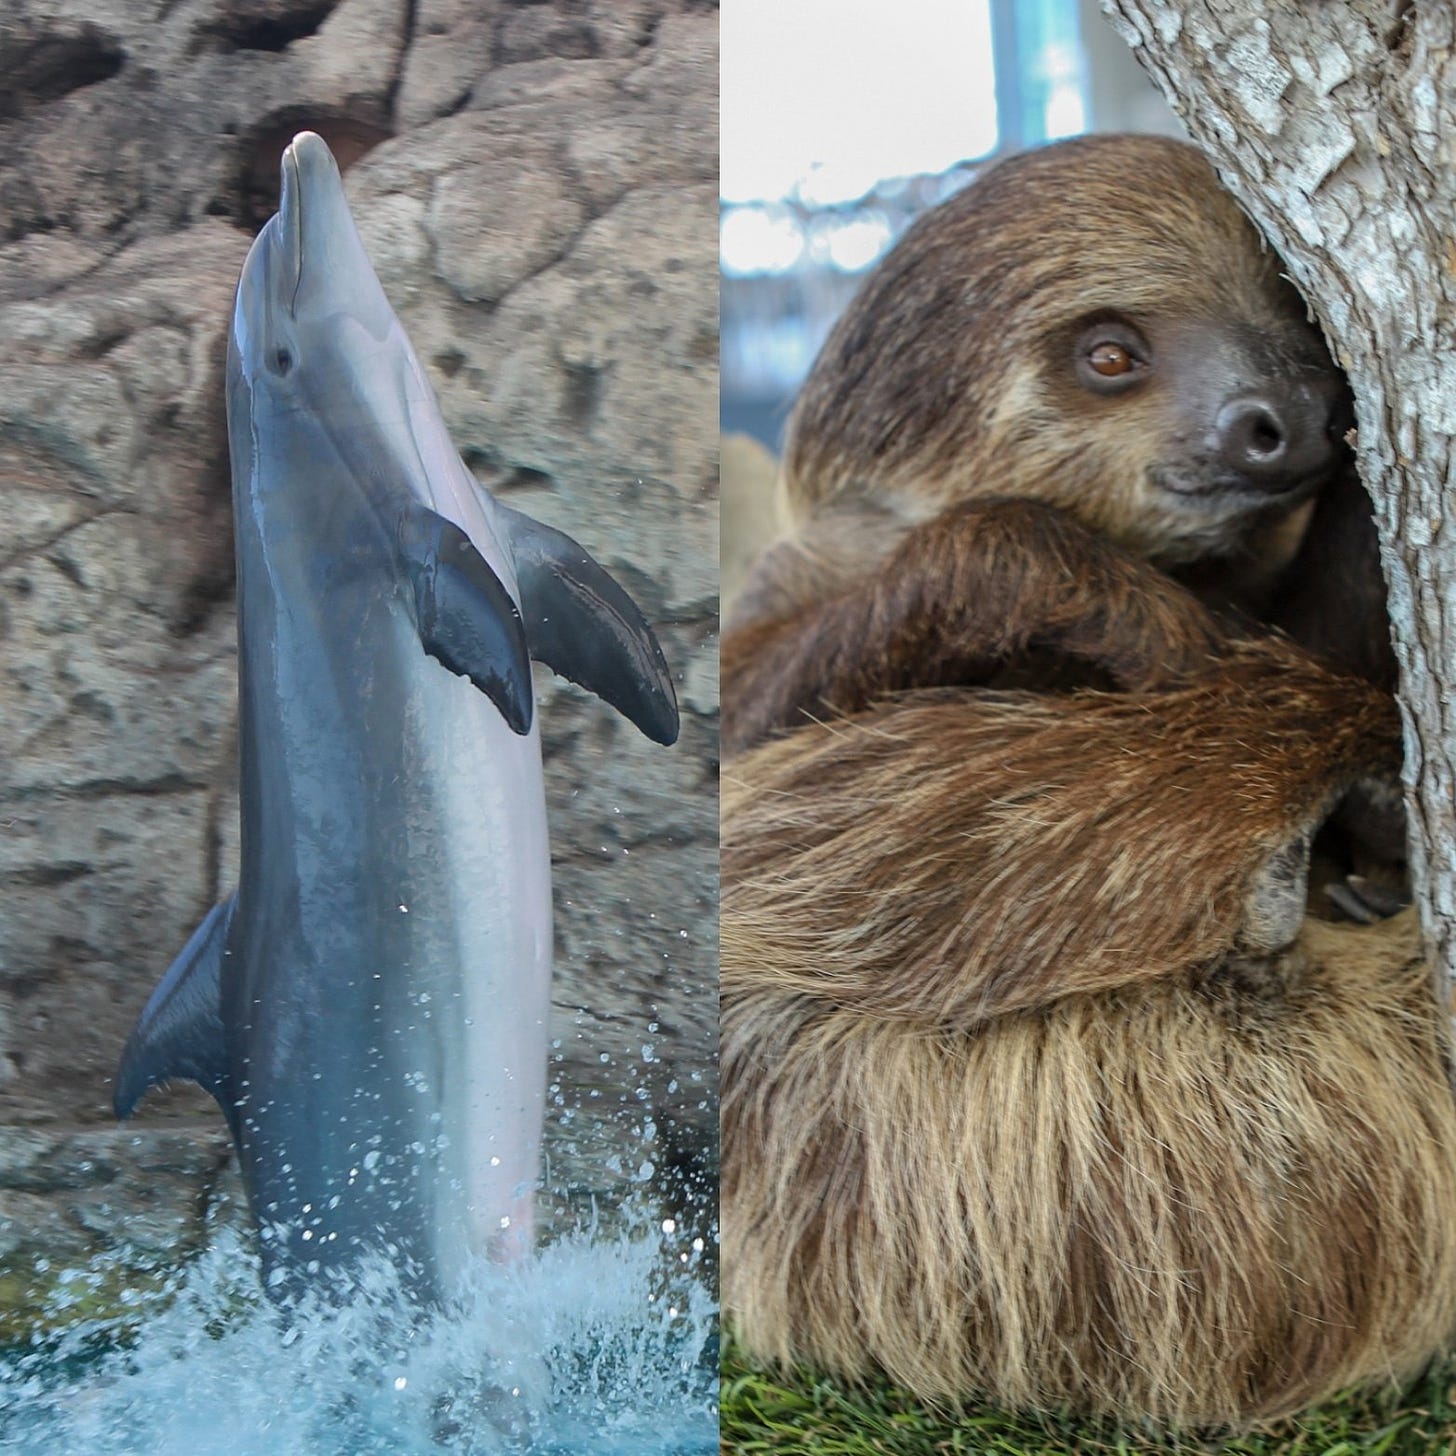 Texas State Aquarium en Twitter: "Dolphin or sloth? It's one of the many  tough choices in this year's March Marine Madness, where you can vote for  your favorite Aquarium animal! Cast your